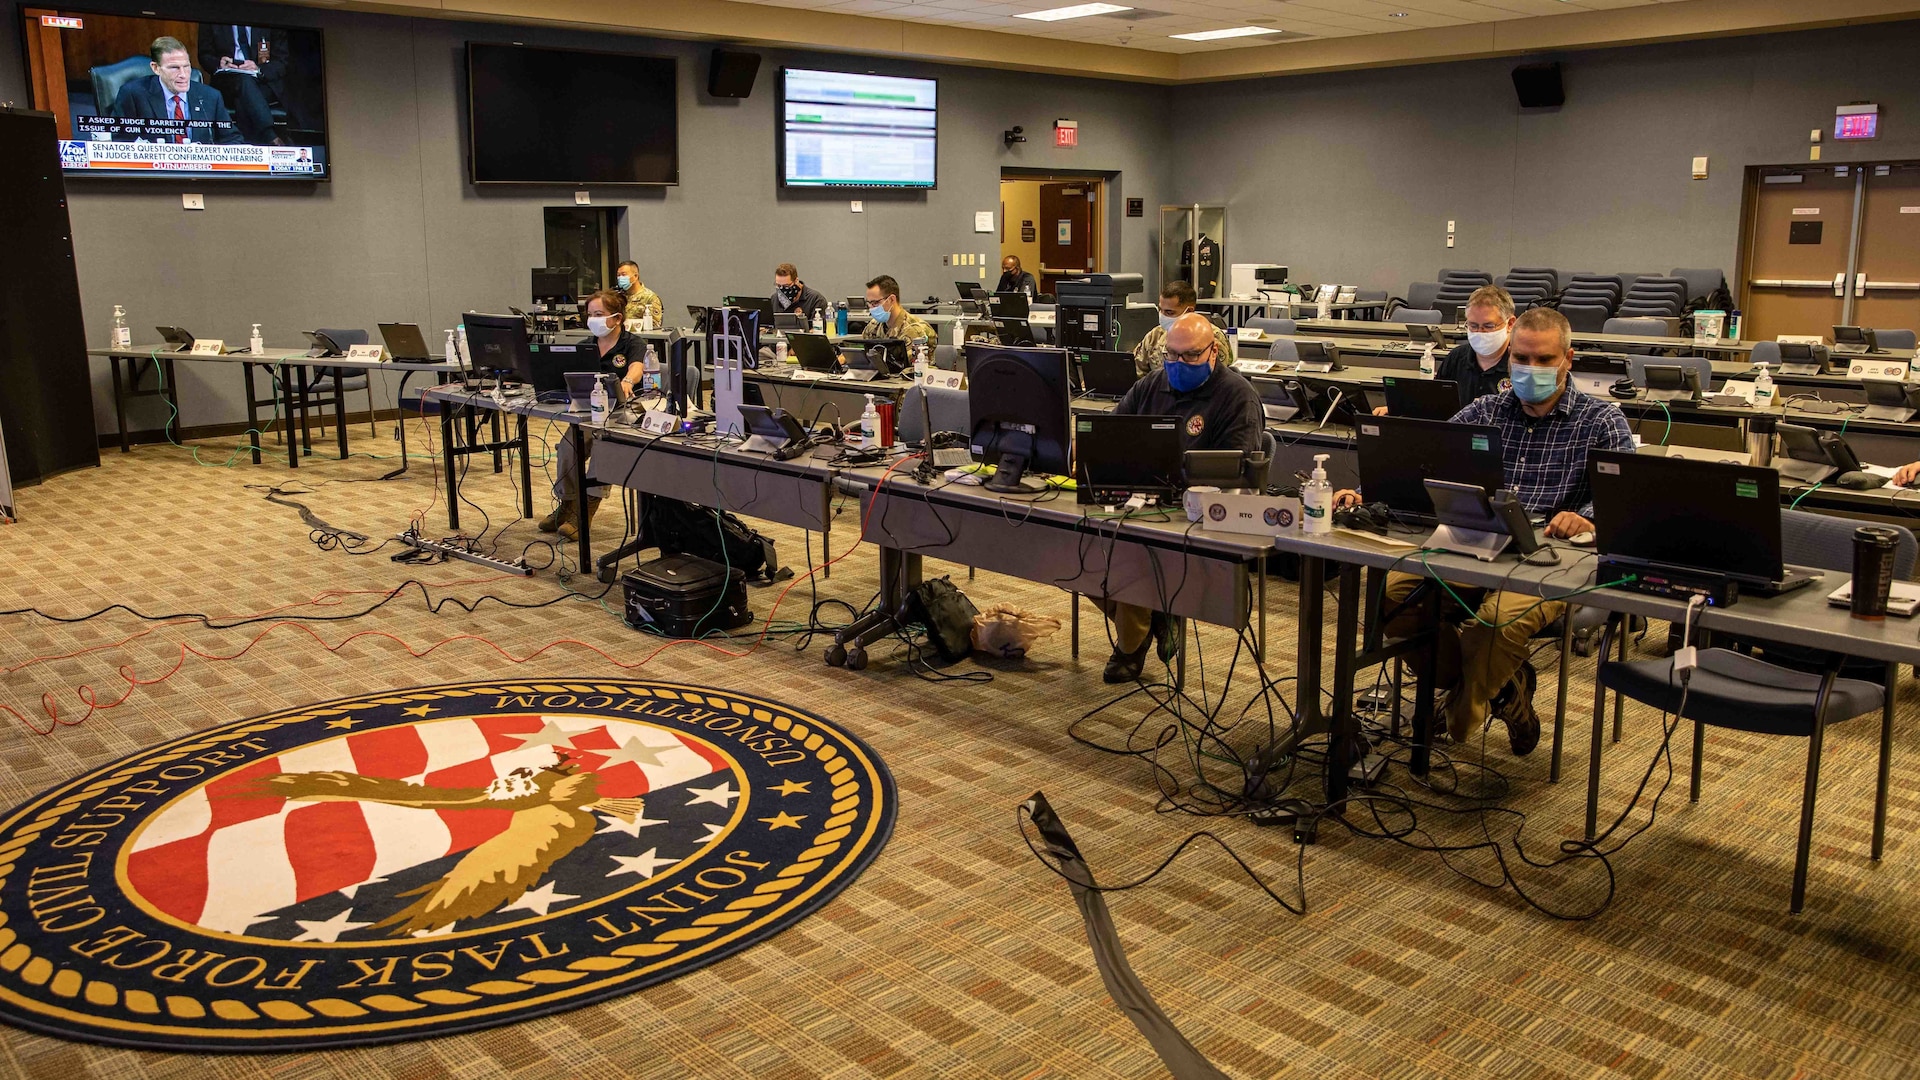 Joint Task Force Civil Support (JTF-CS) personnel in the joint operations center at JTF-CS headquarters respond to a simulated scenario as part of Exercise KODA, Oct. 15, 2020.